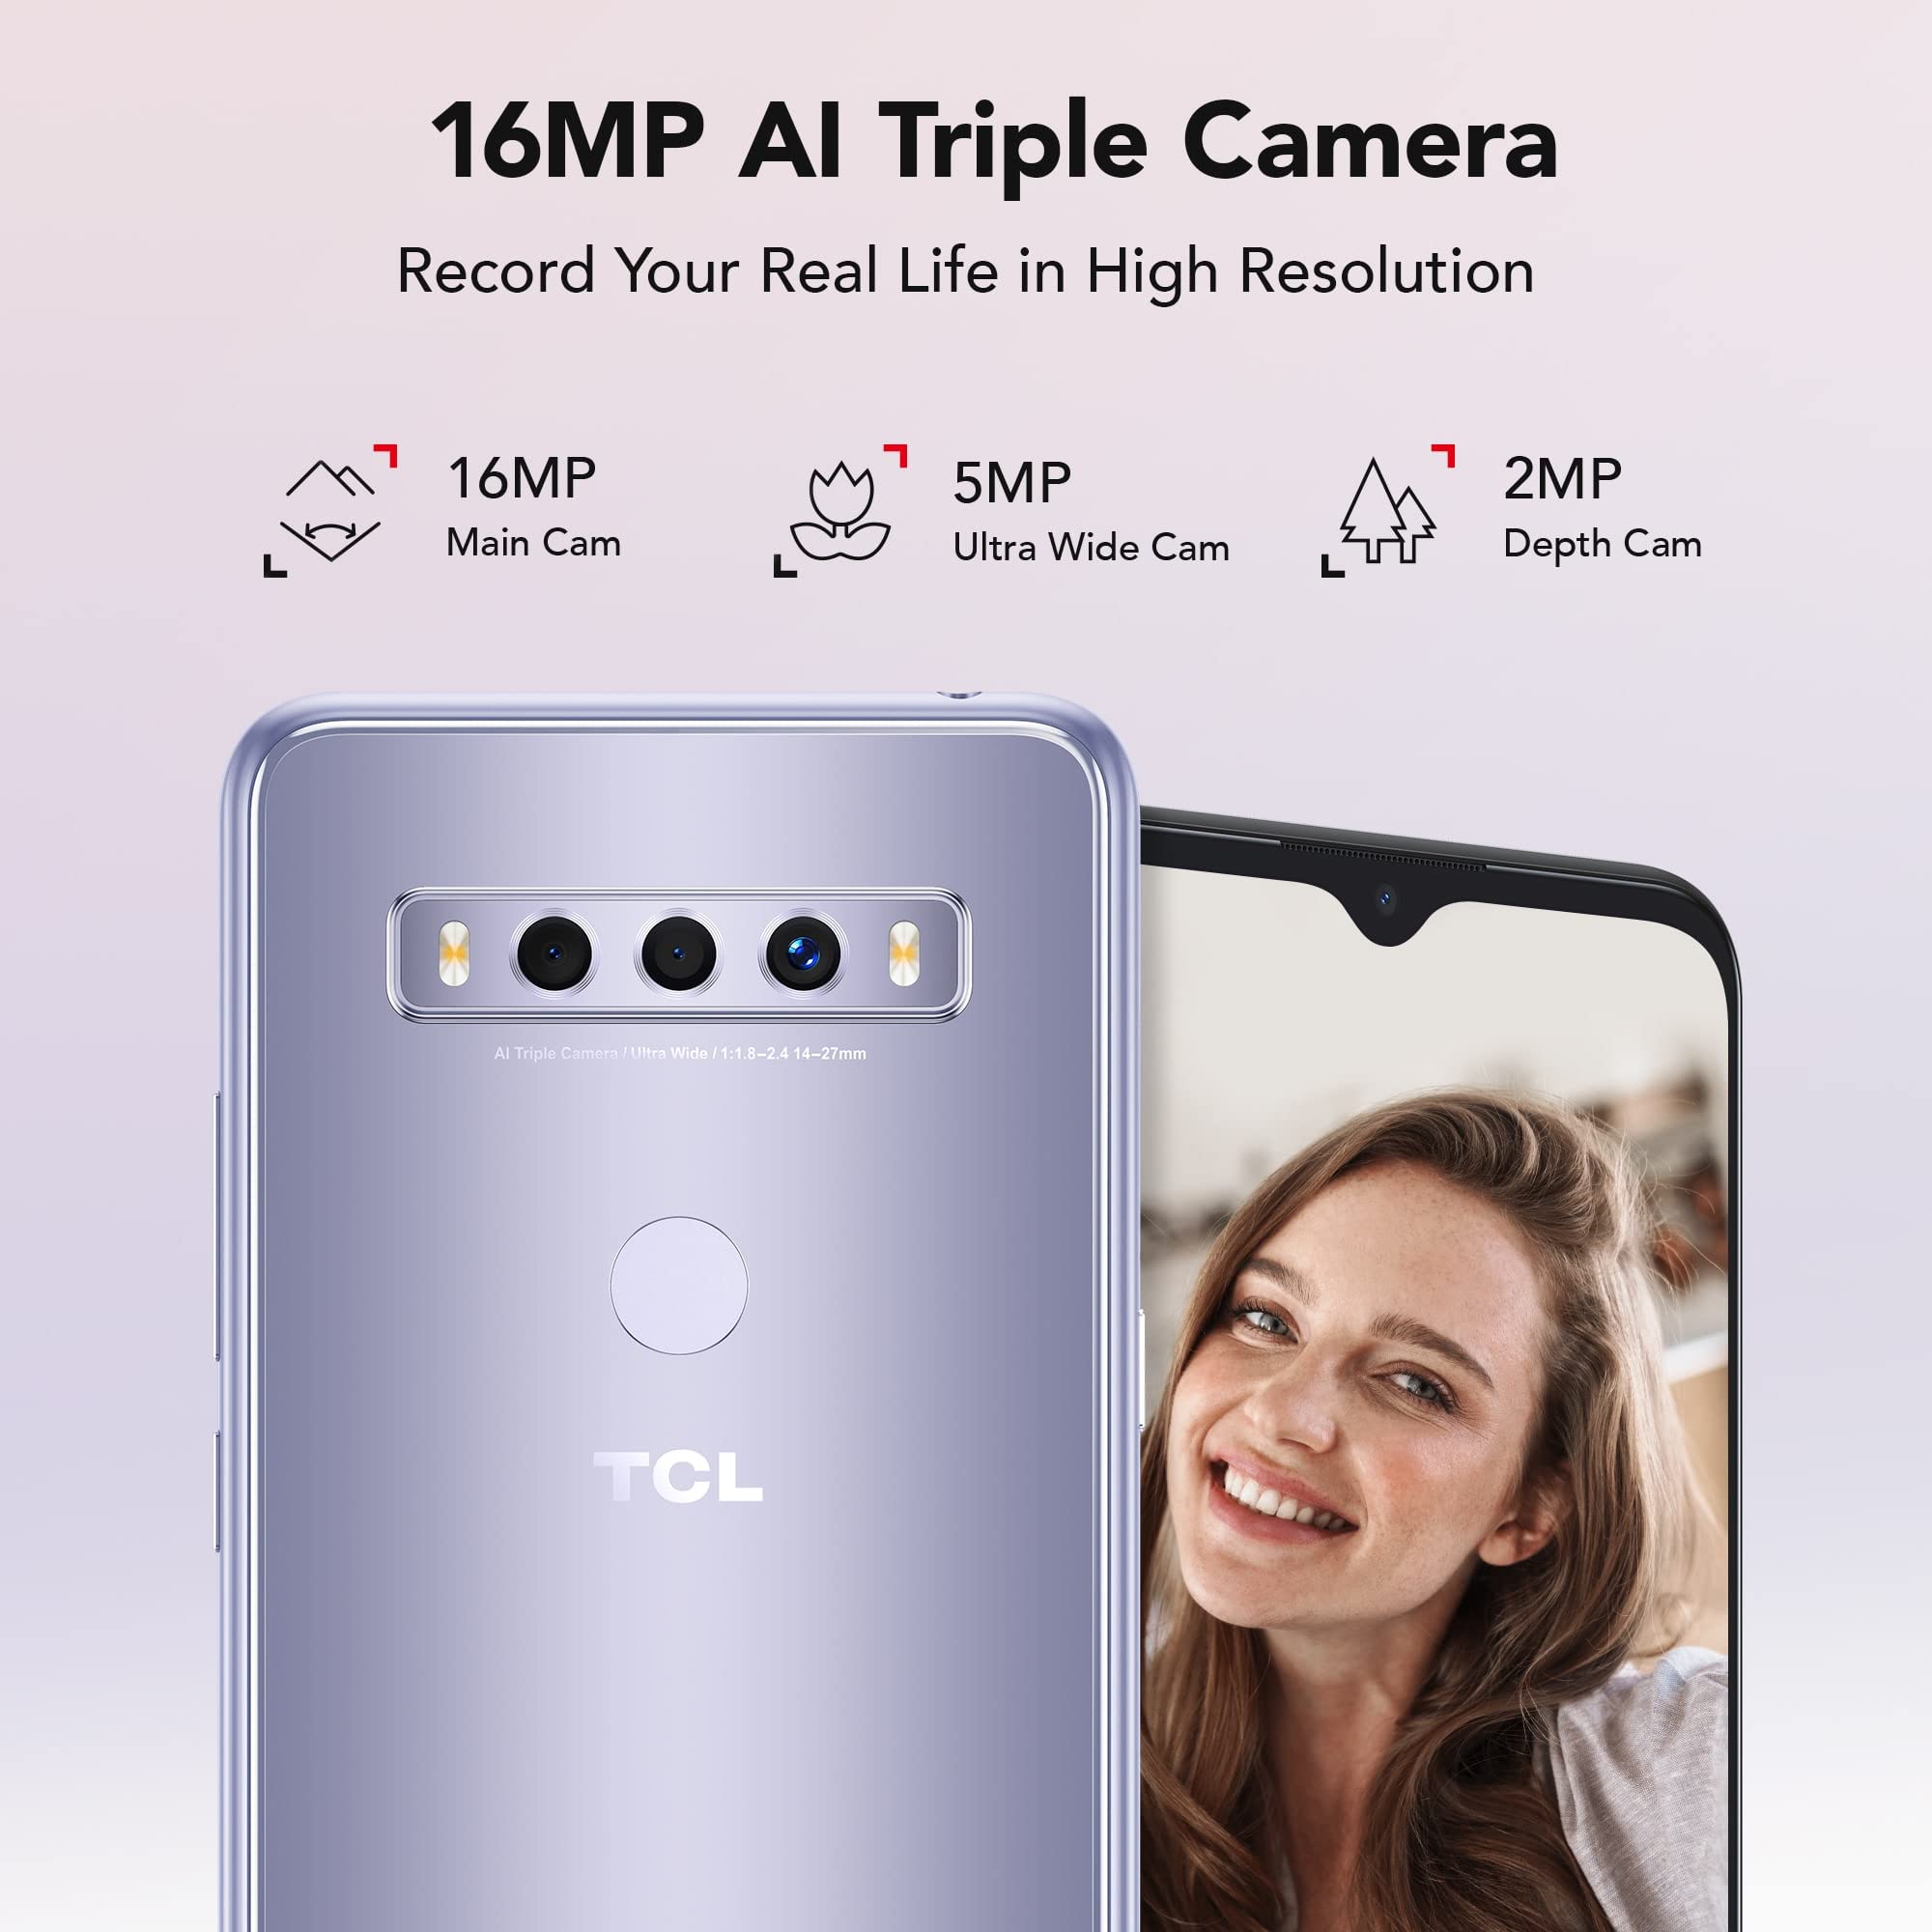 TCL 10 SE Unlocked Android Smartphone, 6.52